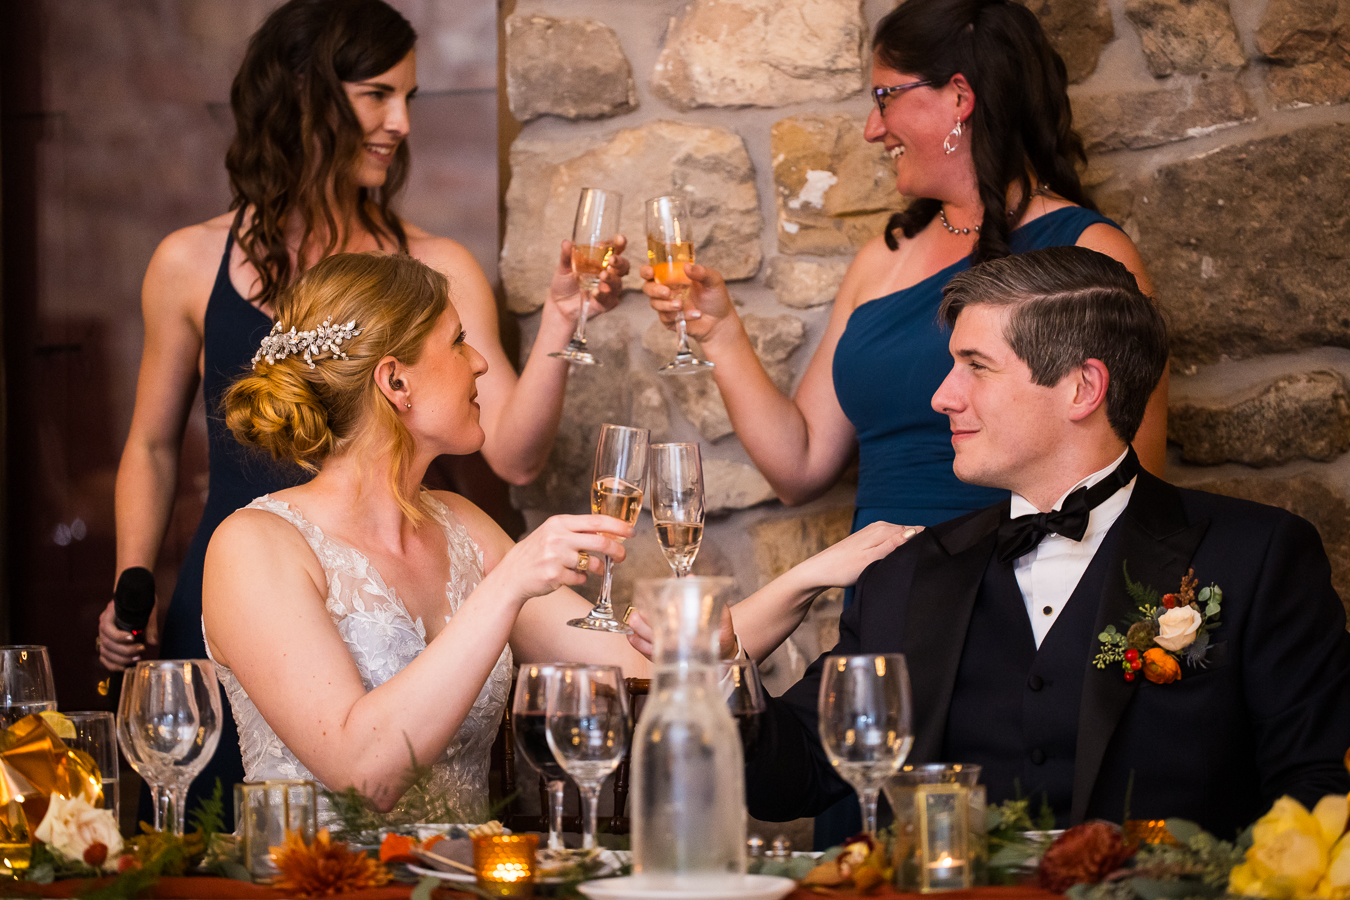 candid moment as the bride and groom share a toast as two bridesmaids share a toast behind them during their indoor wedding reception in lancast pa 